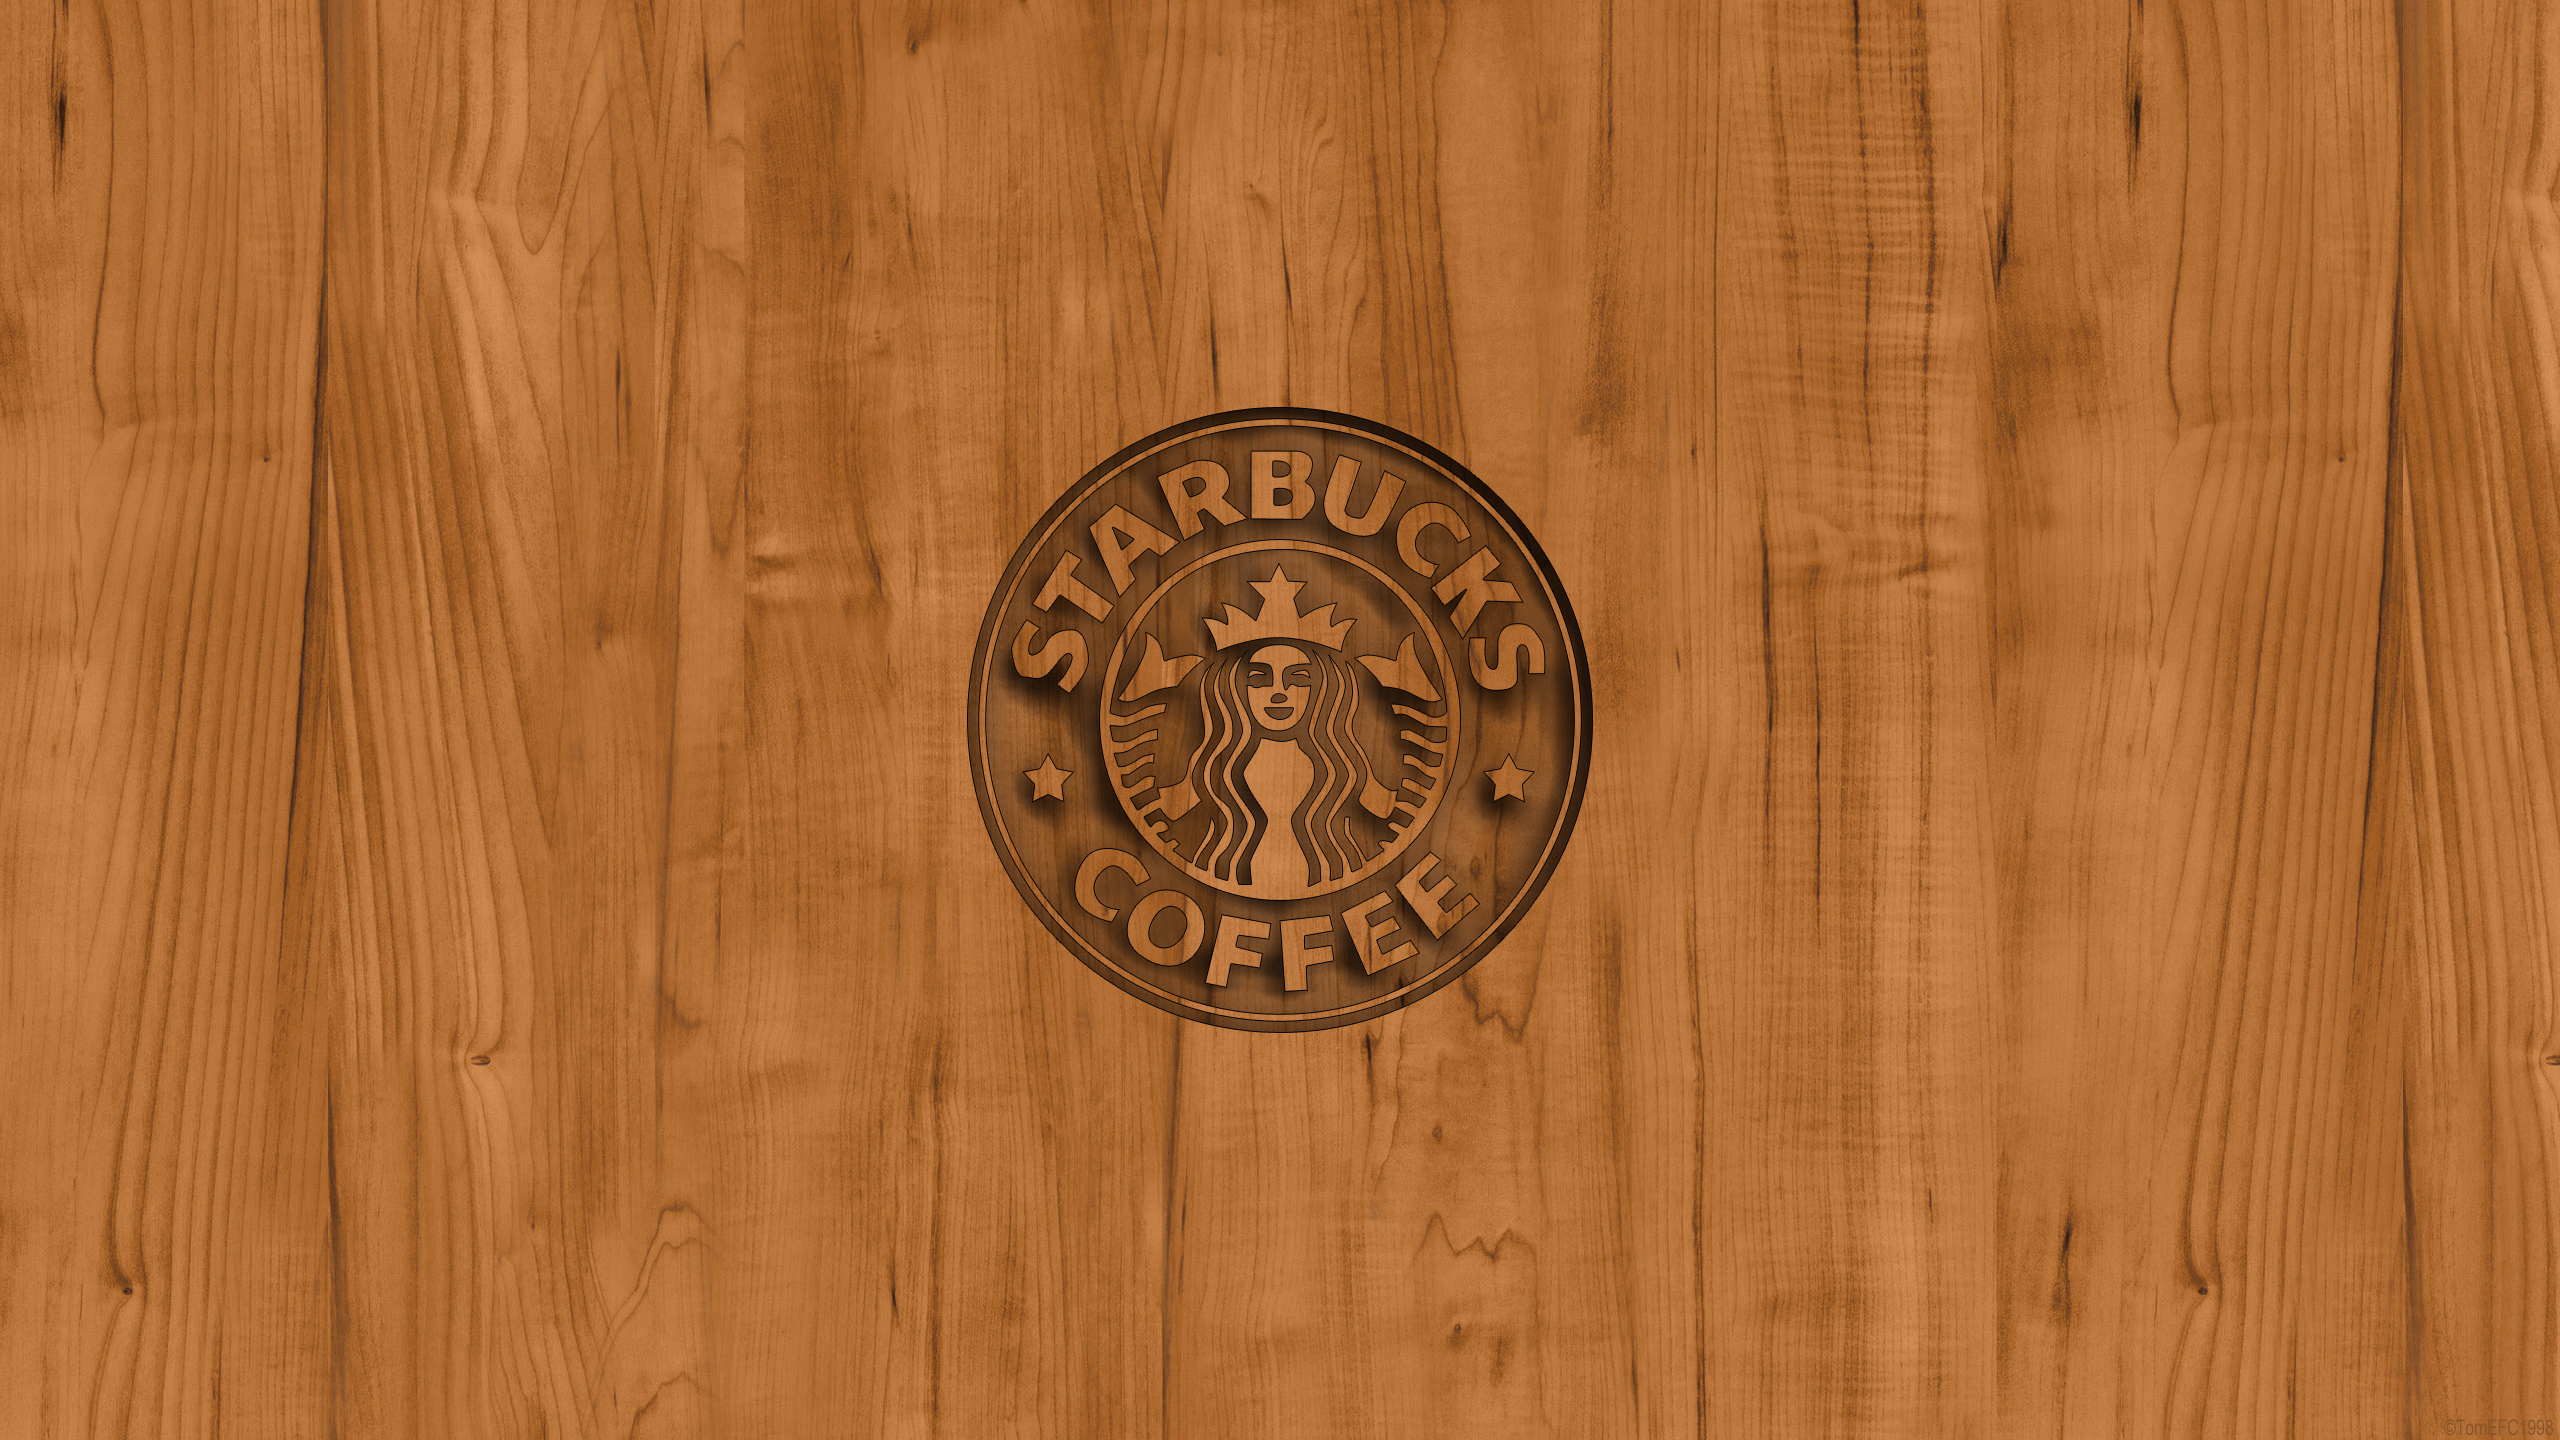 Starbucks Cool Wallpapers 14461 - HD Wallpapers Site